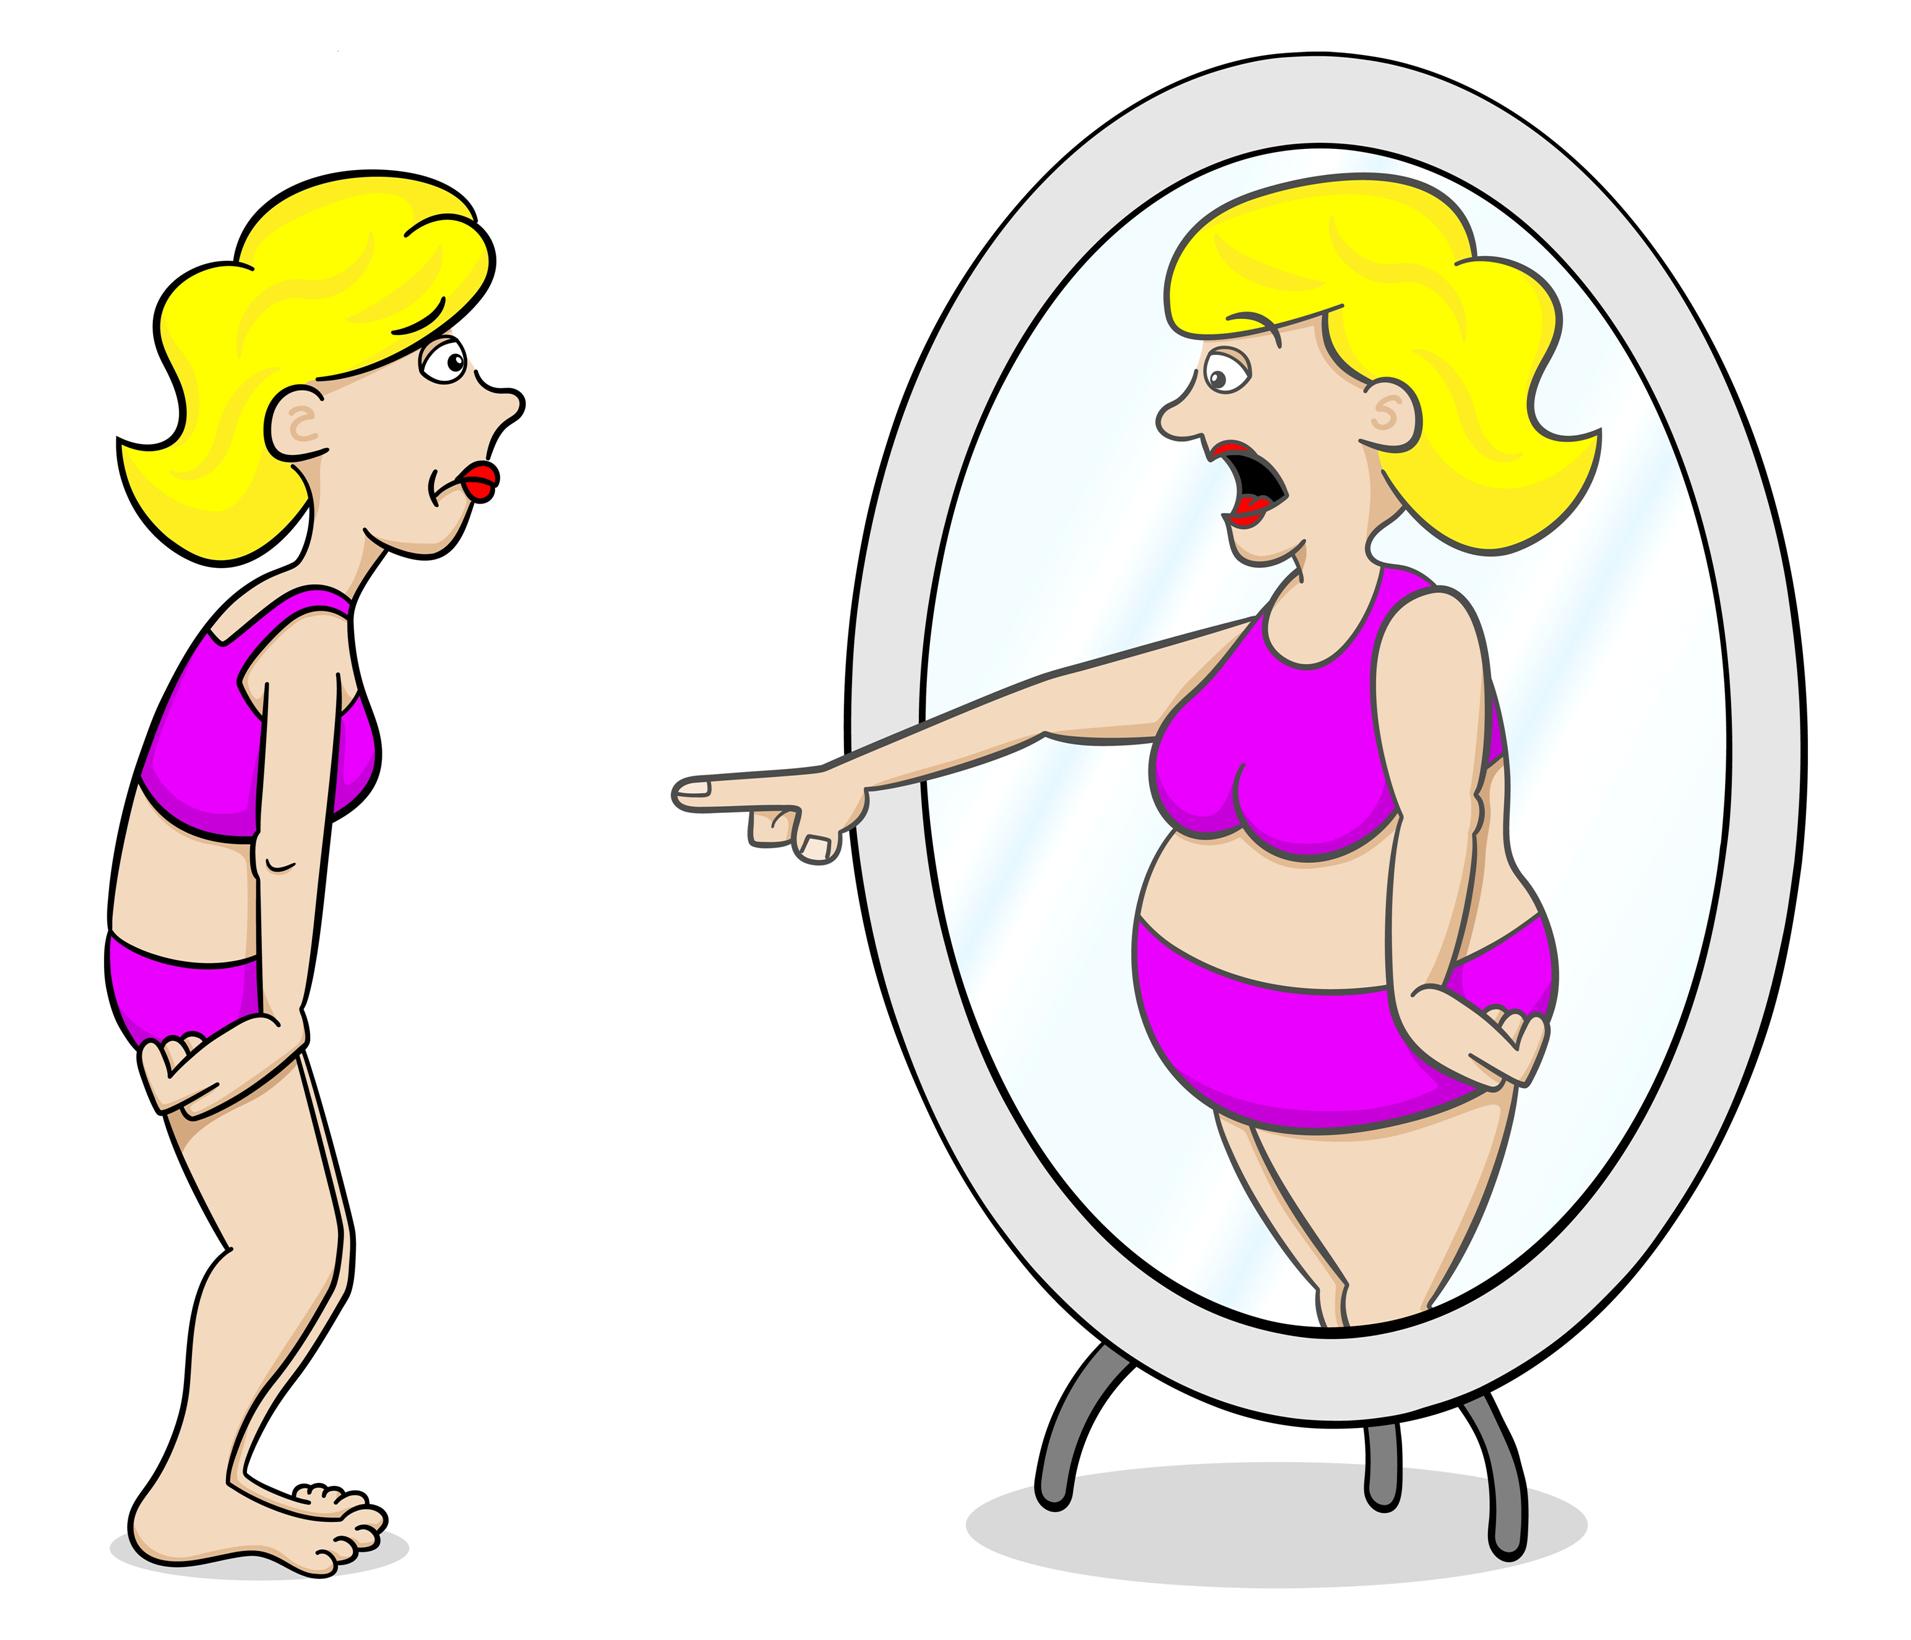 Women and body image - How to Improve Your Confidence.